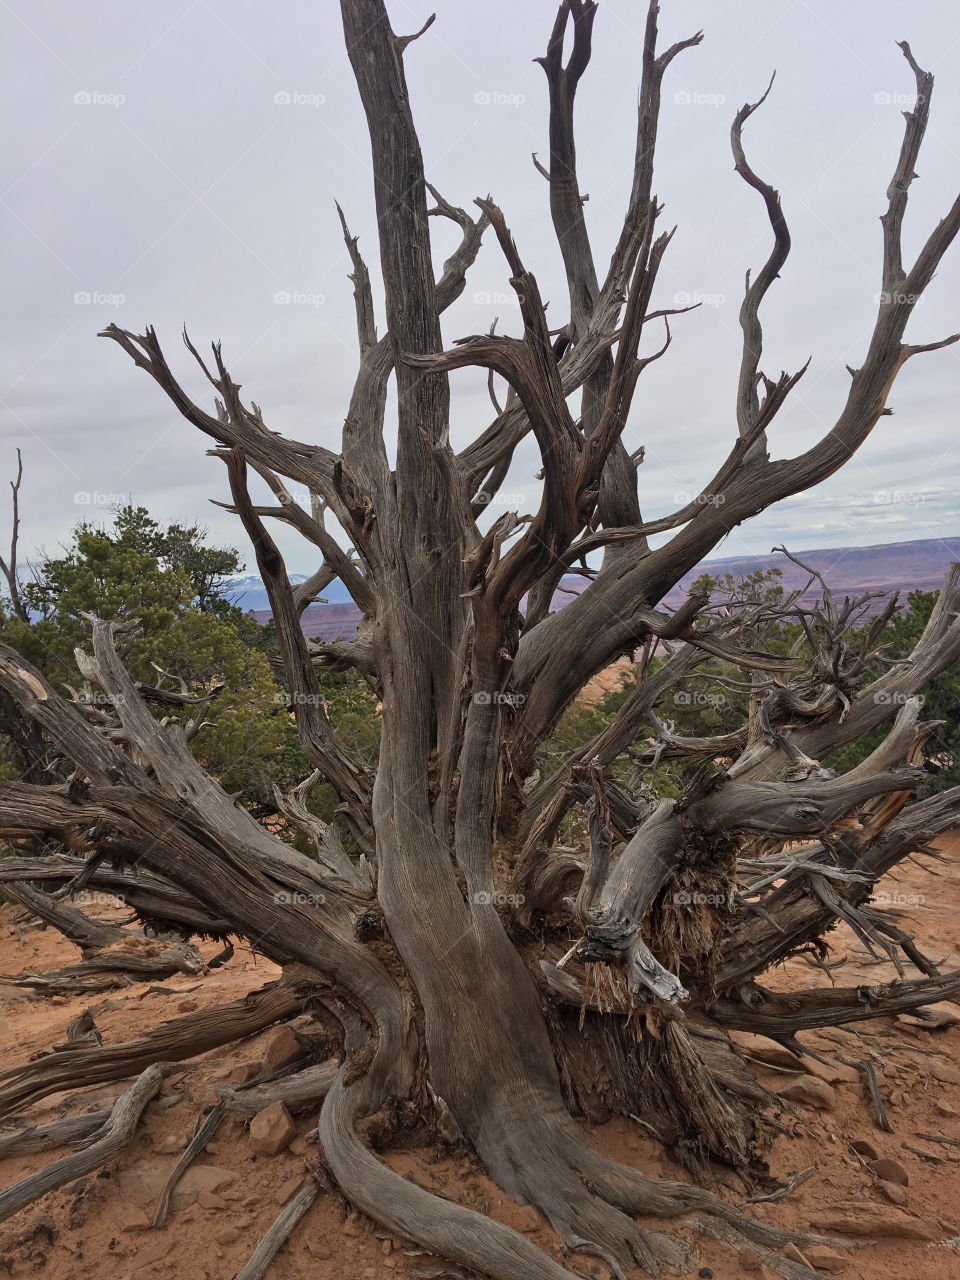 Tree in a desert Canyon